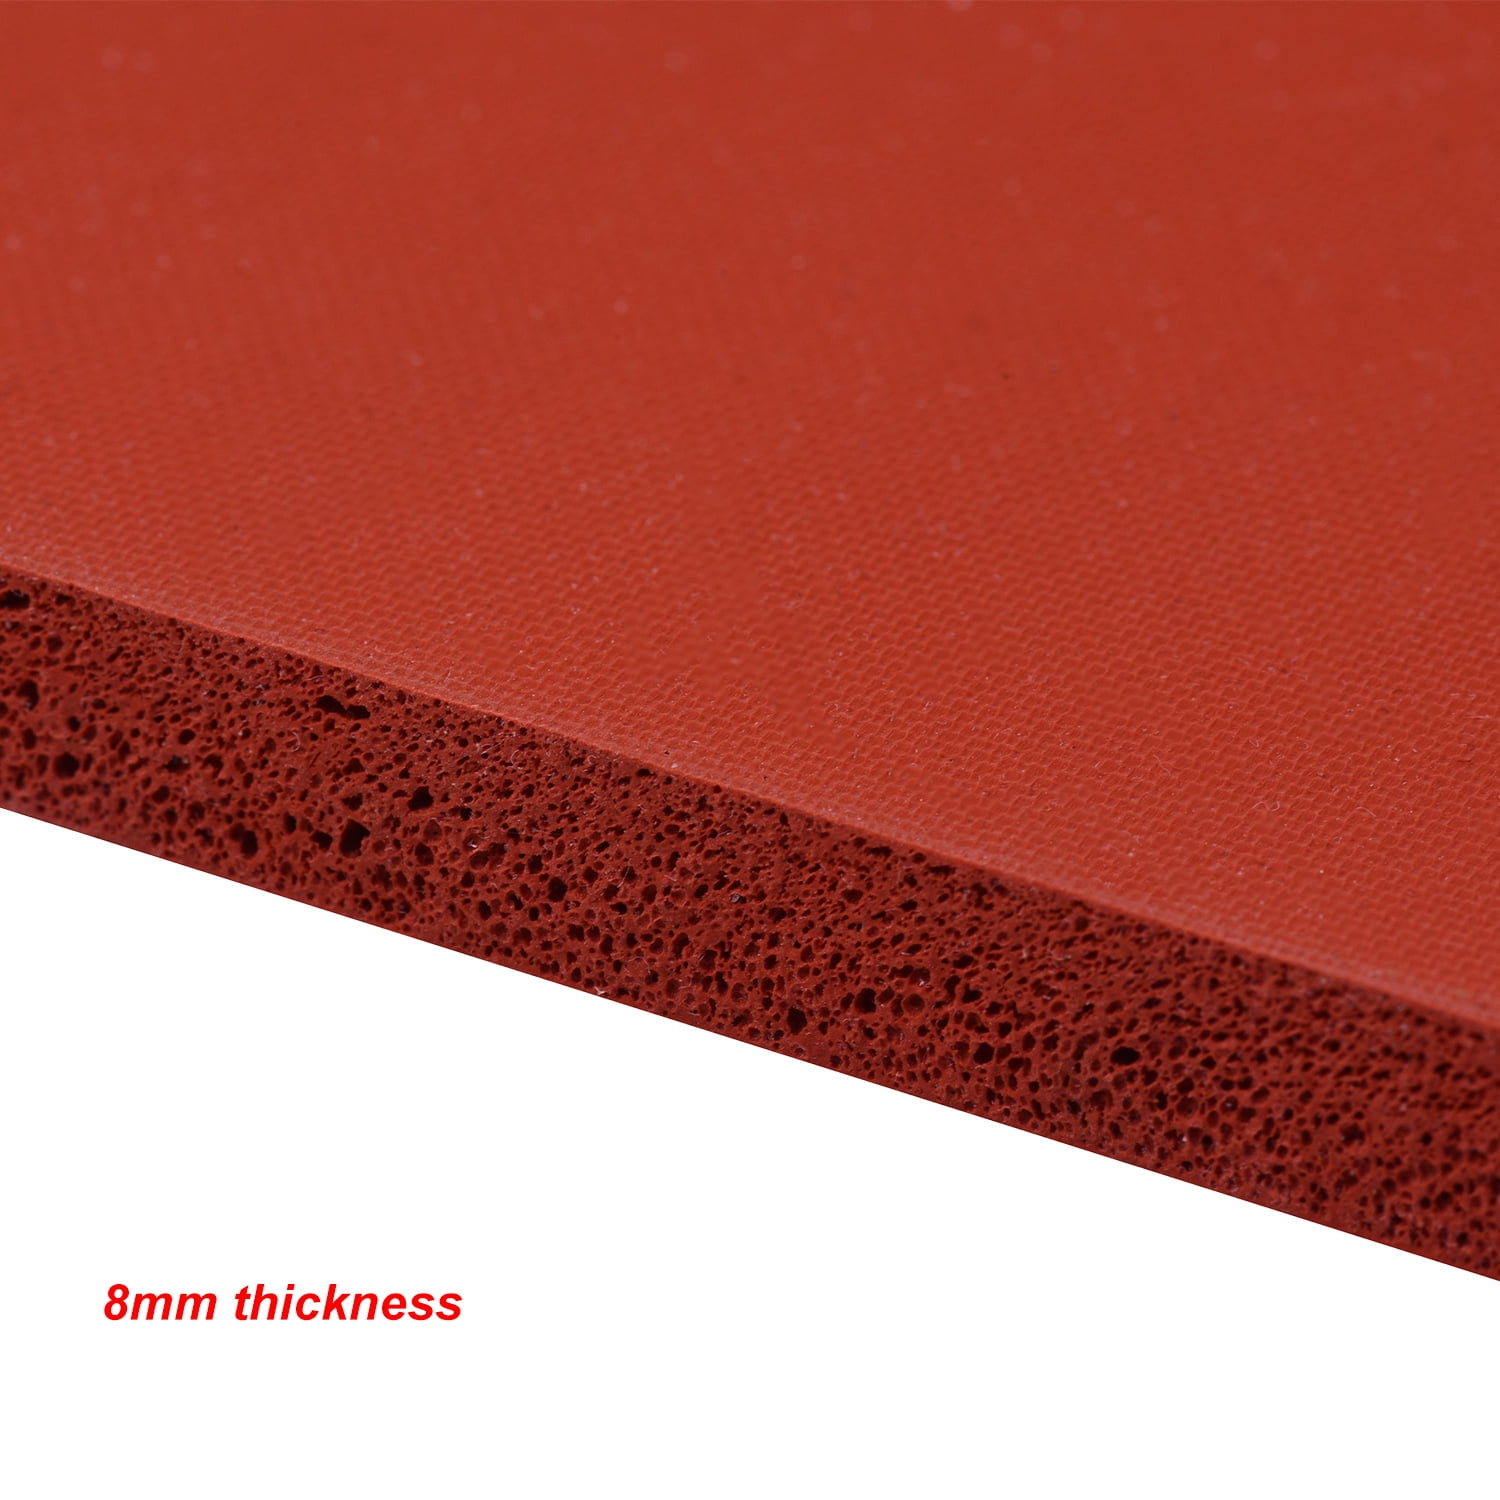 Silicone Heat Resistant Mats for Heat Press, Transfer Printing, Multiple  Sizes